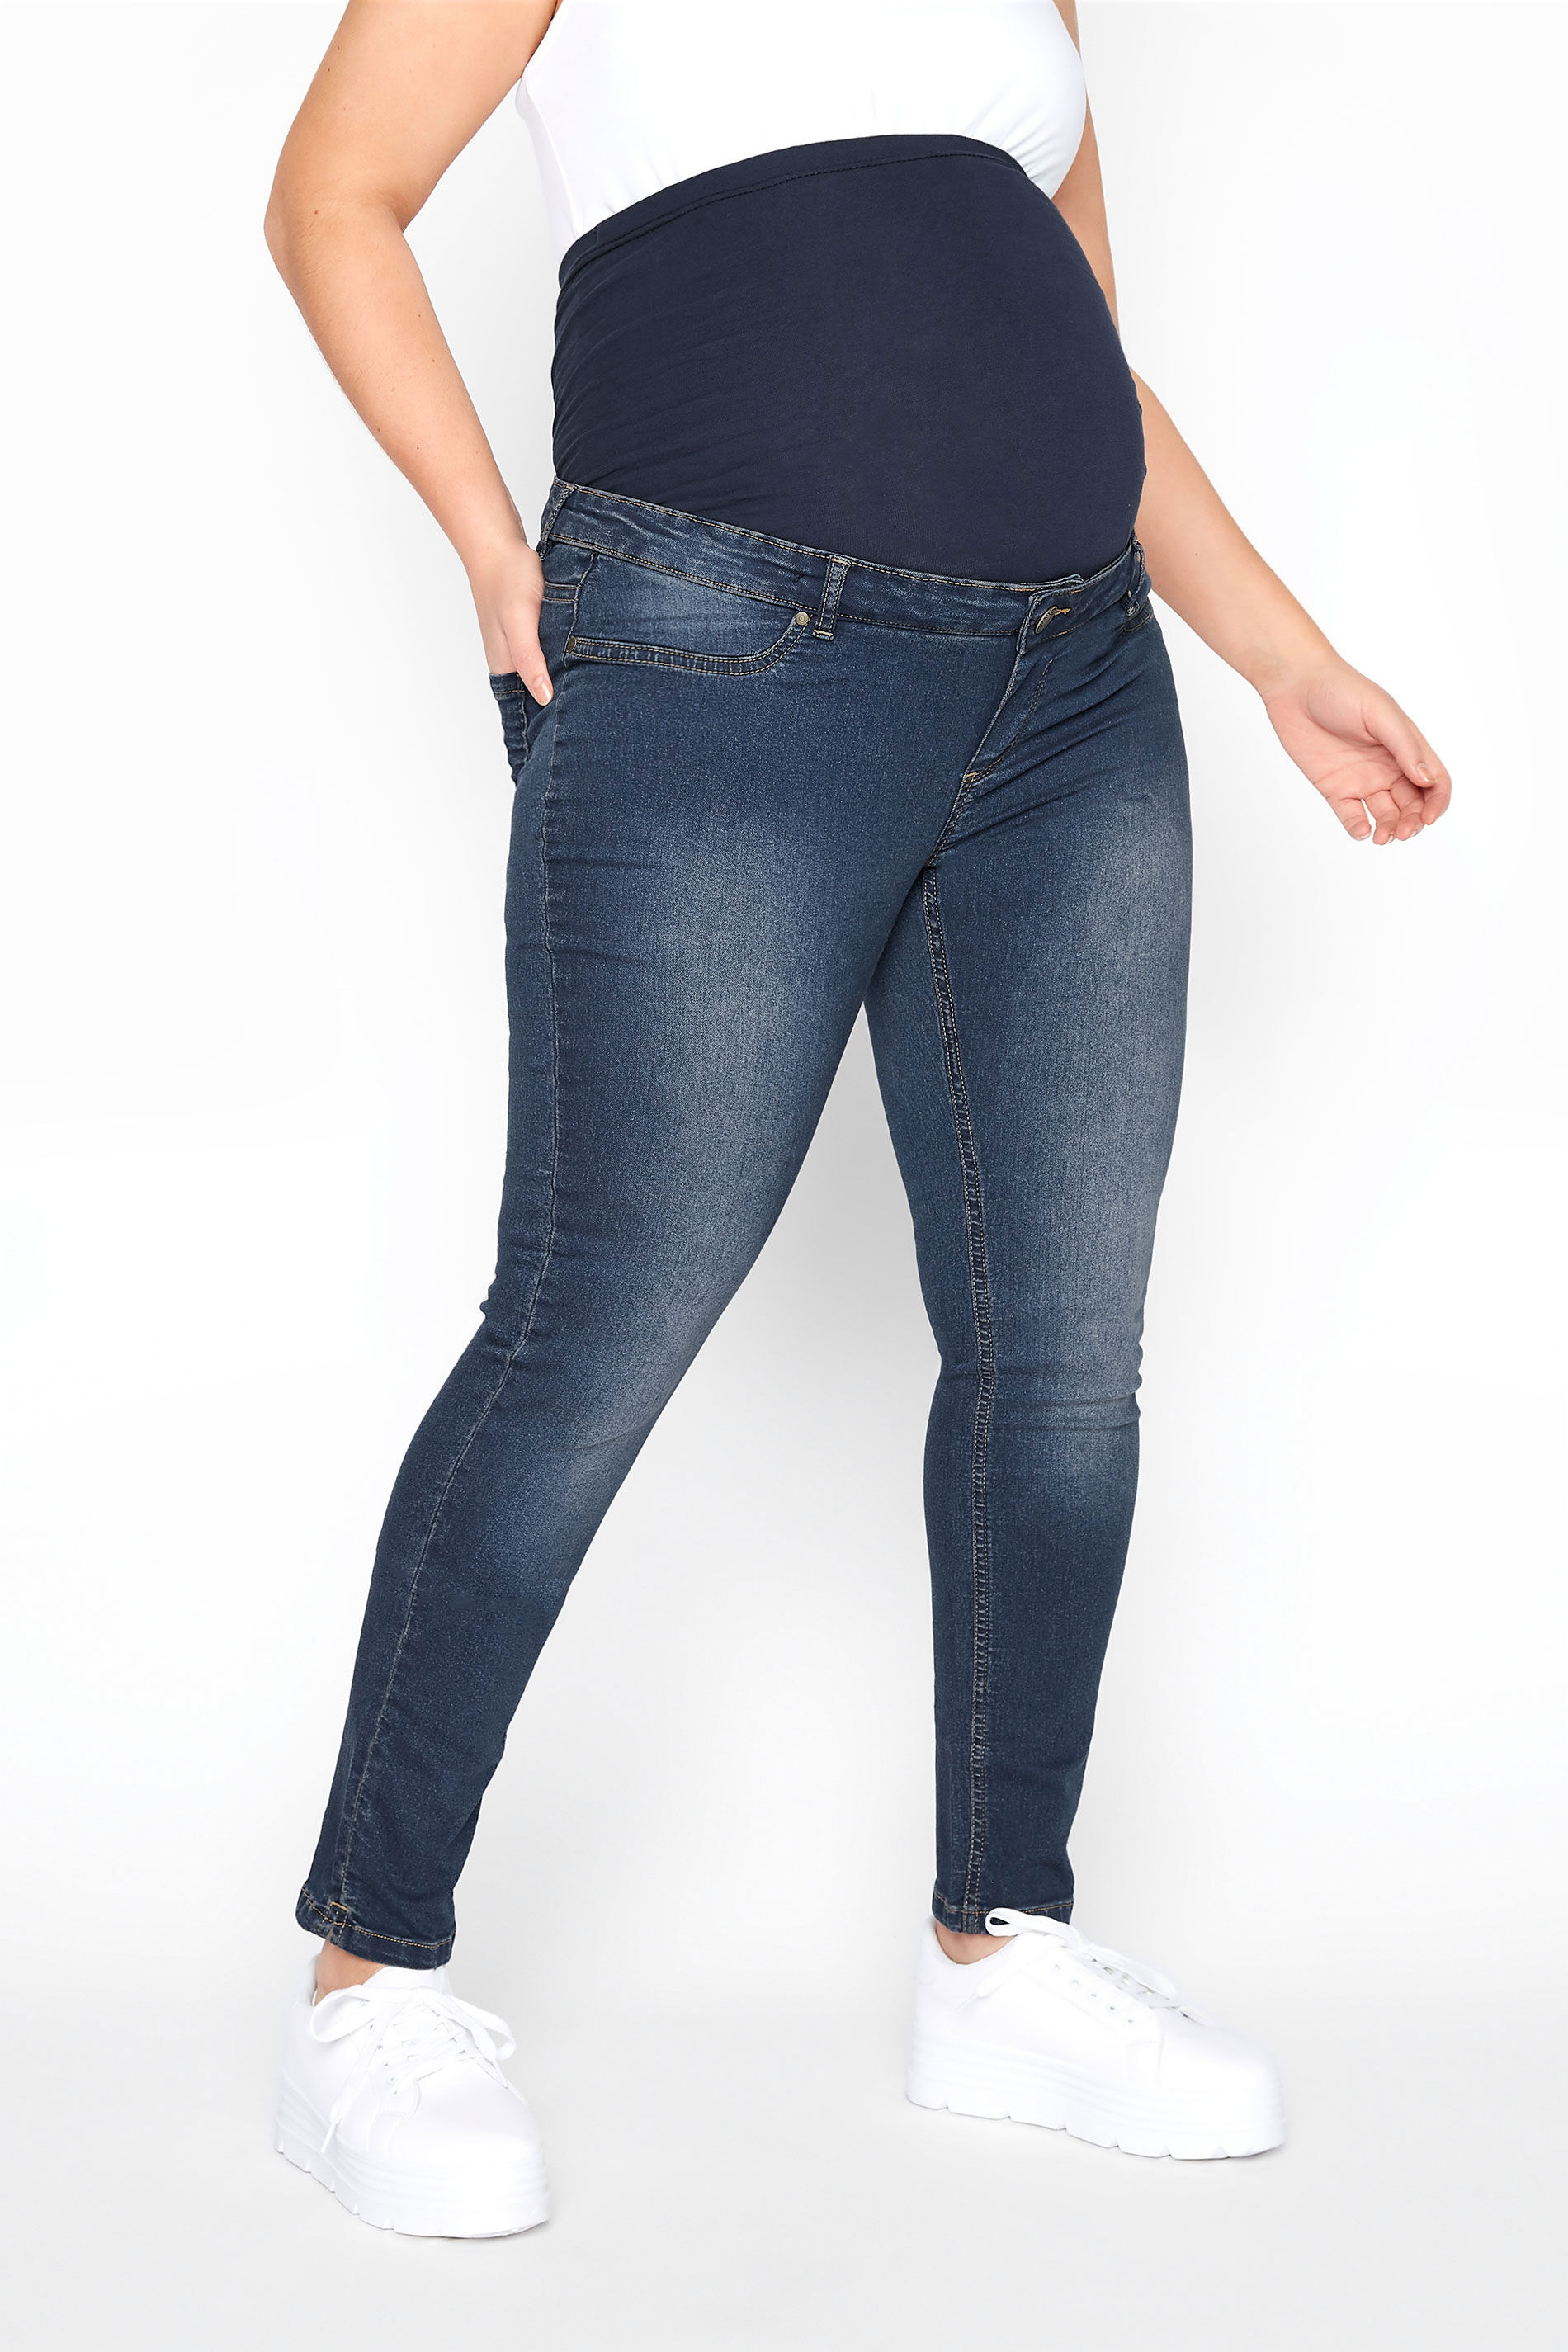 Yours Clothing Bump it up maternity blue skinny jeans with comfort panel